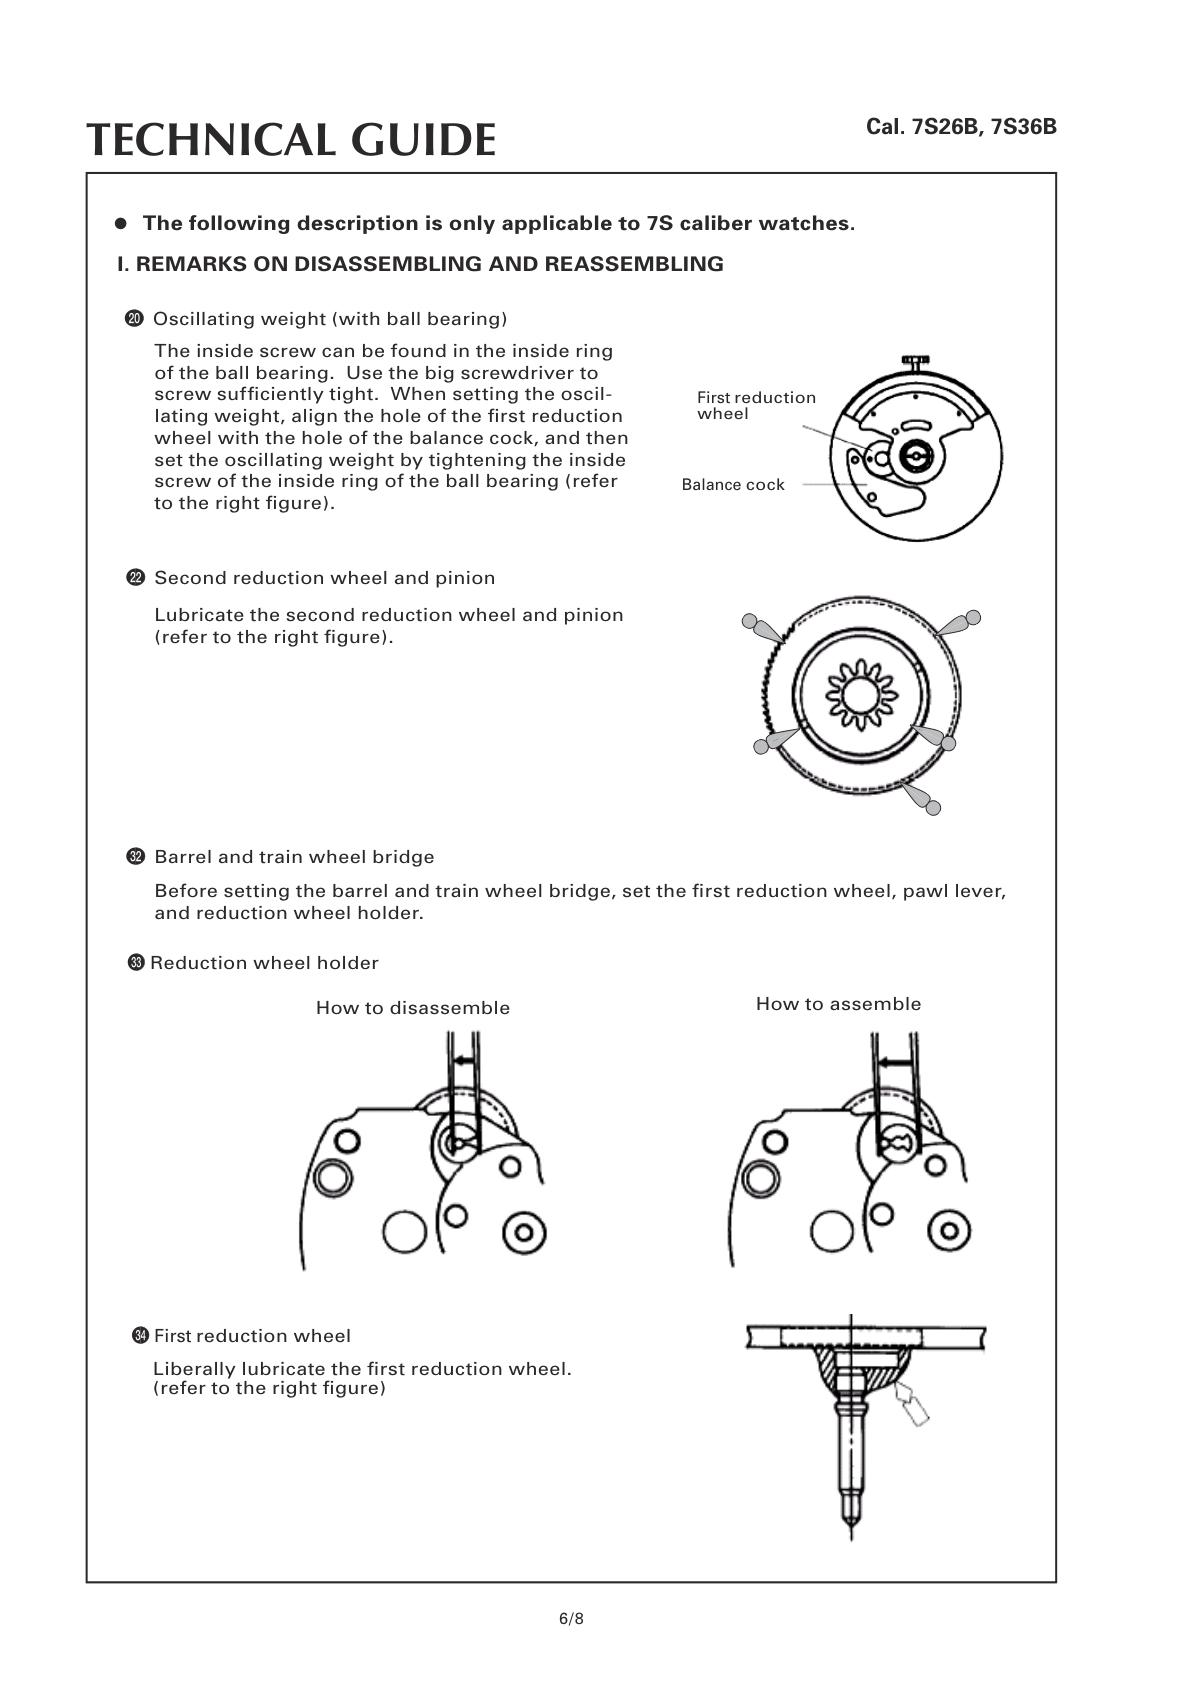 watch movement technical information